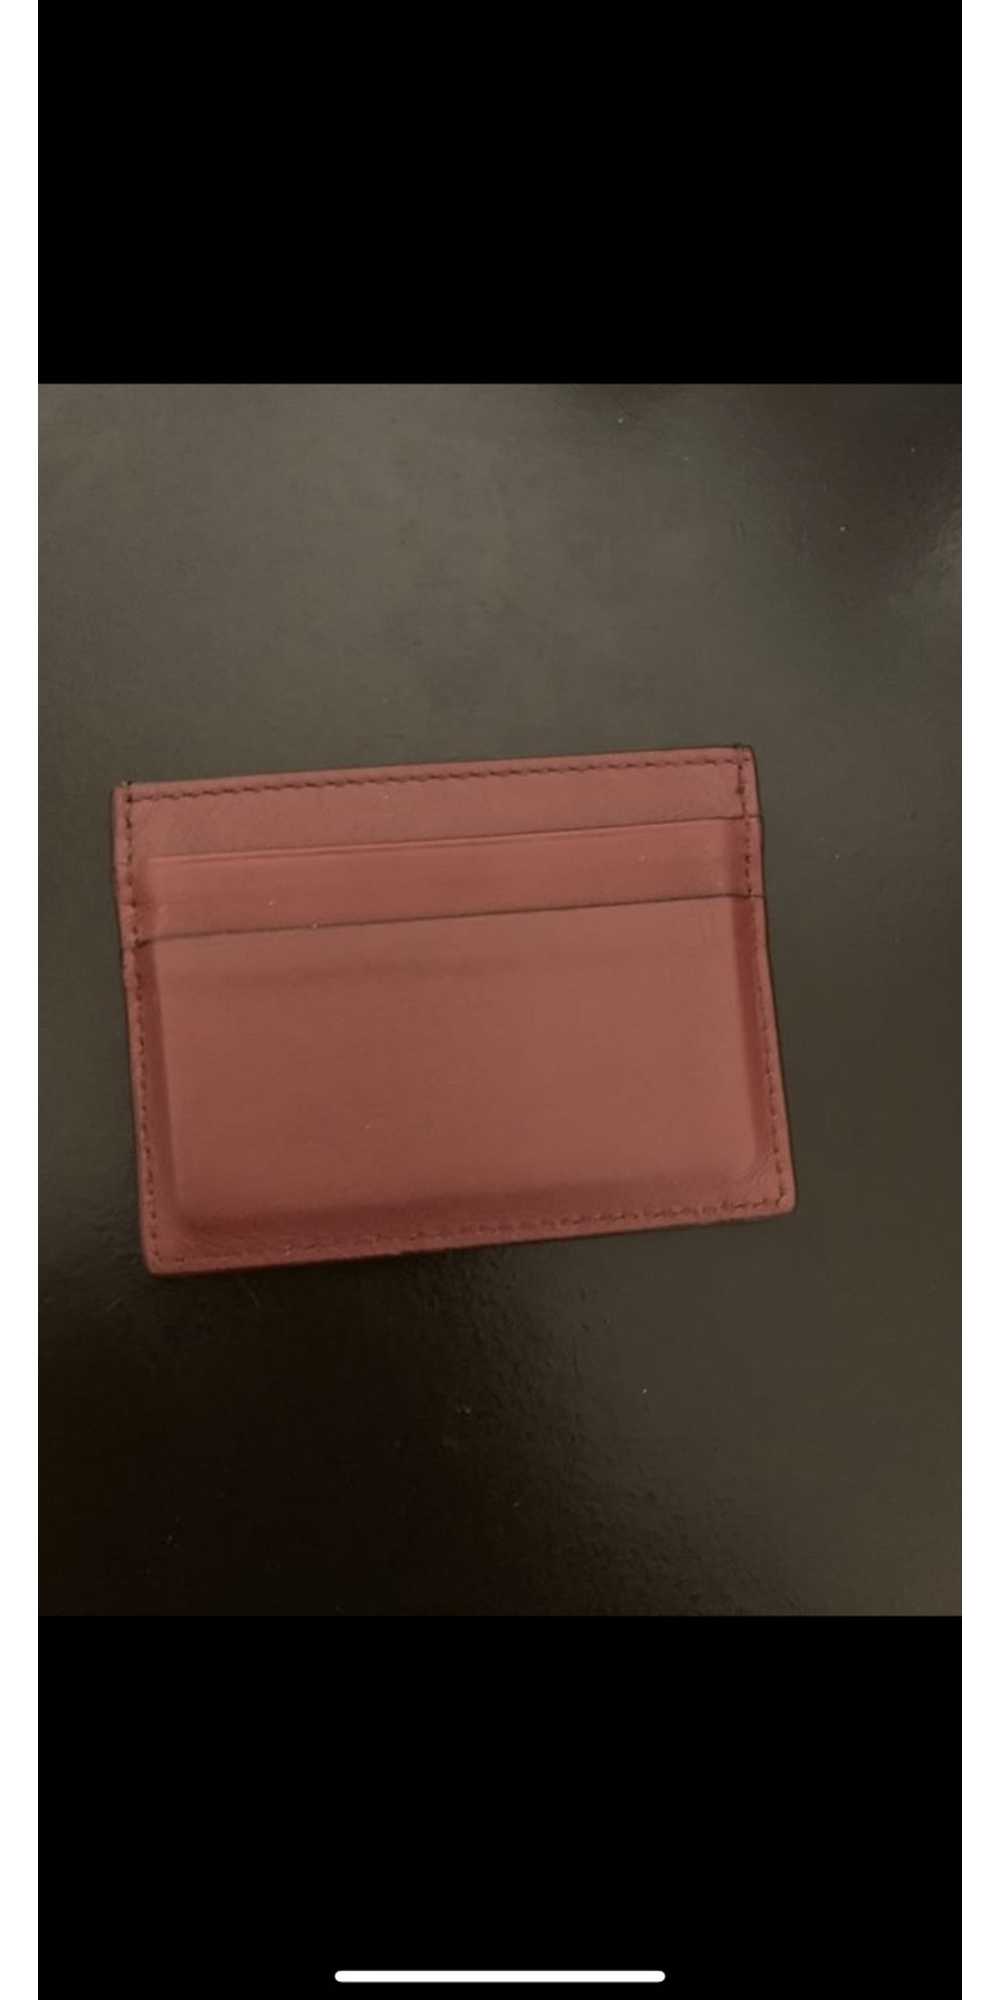 Burberry Burberry wallet - image 2